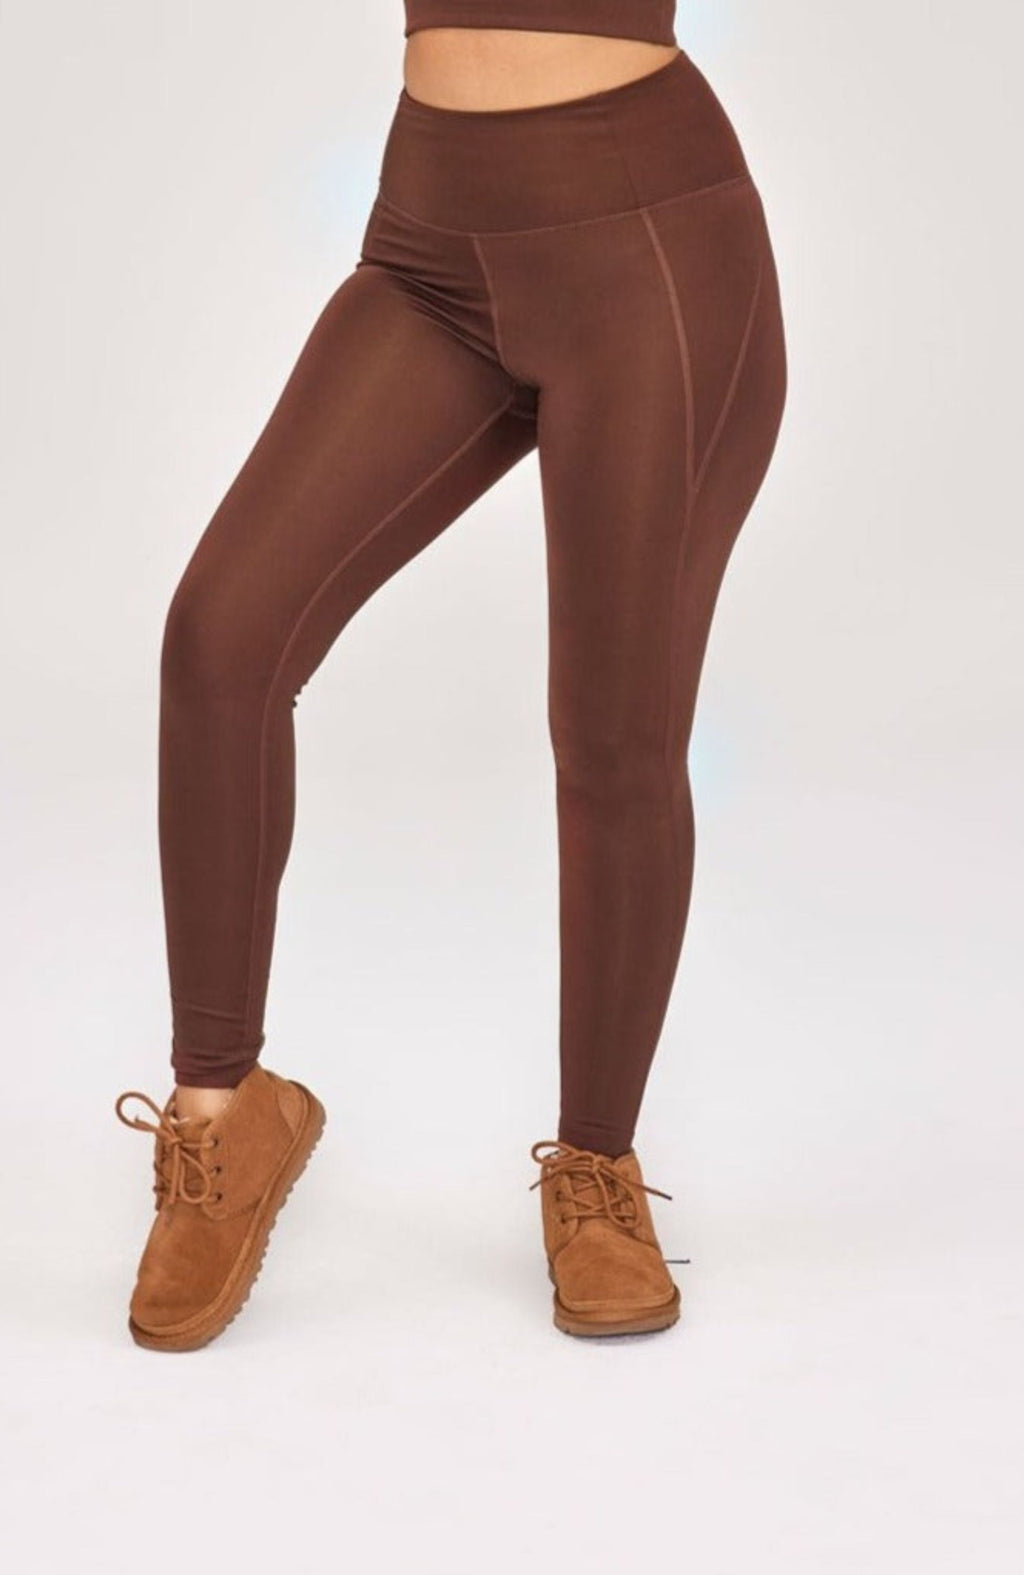 Girlfriend collective earth high rise legging ethical activewear canada